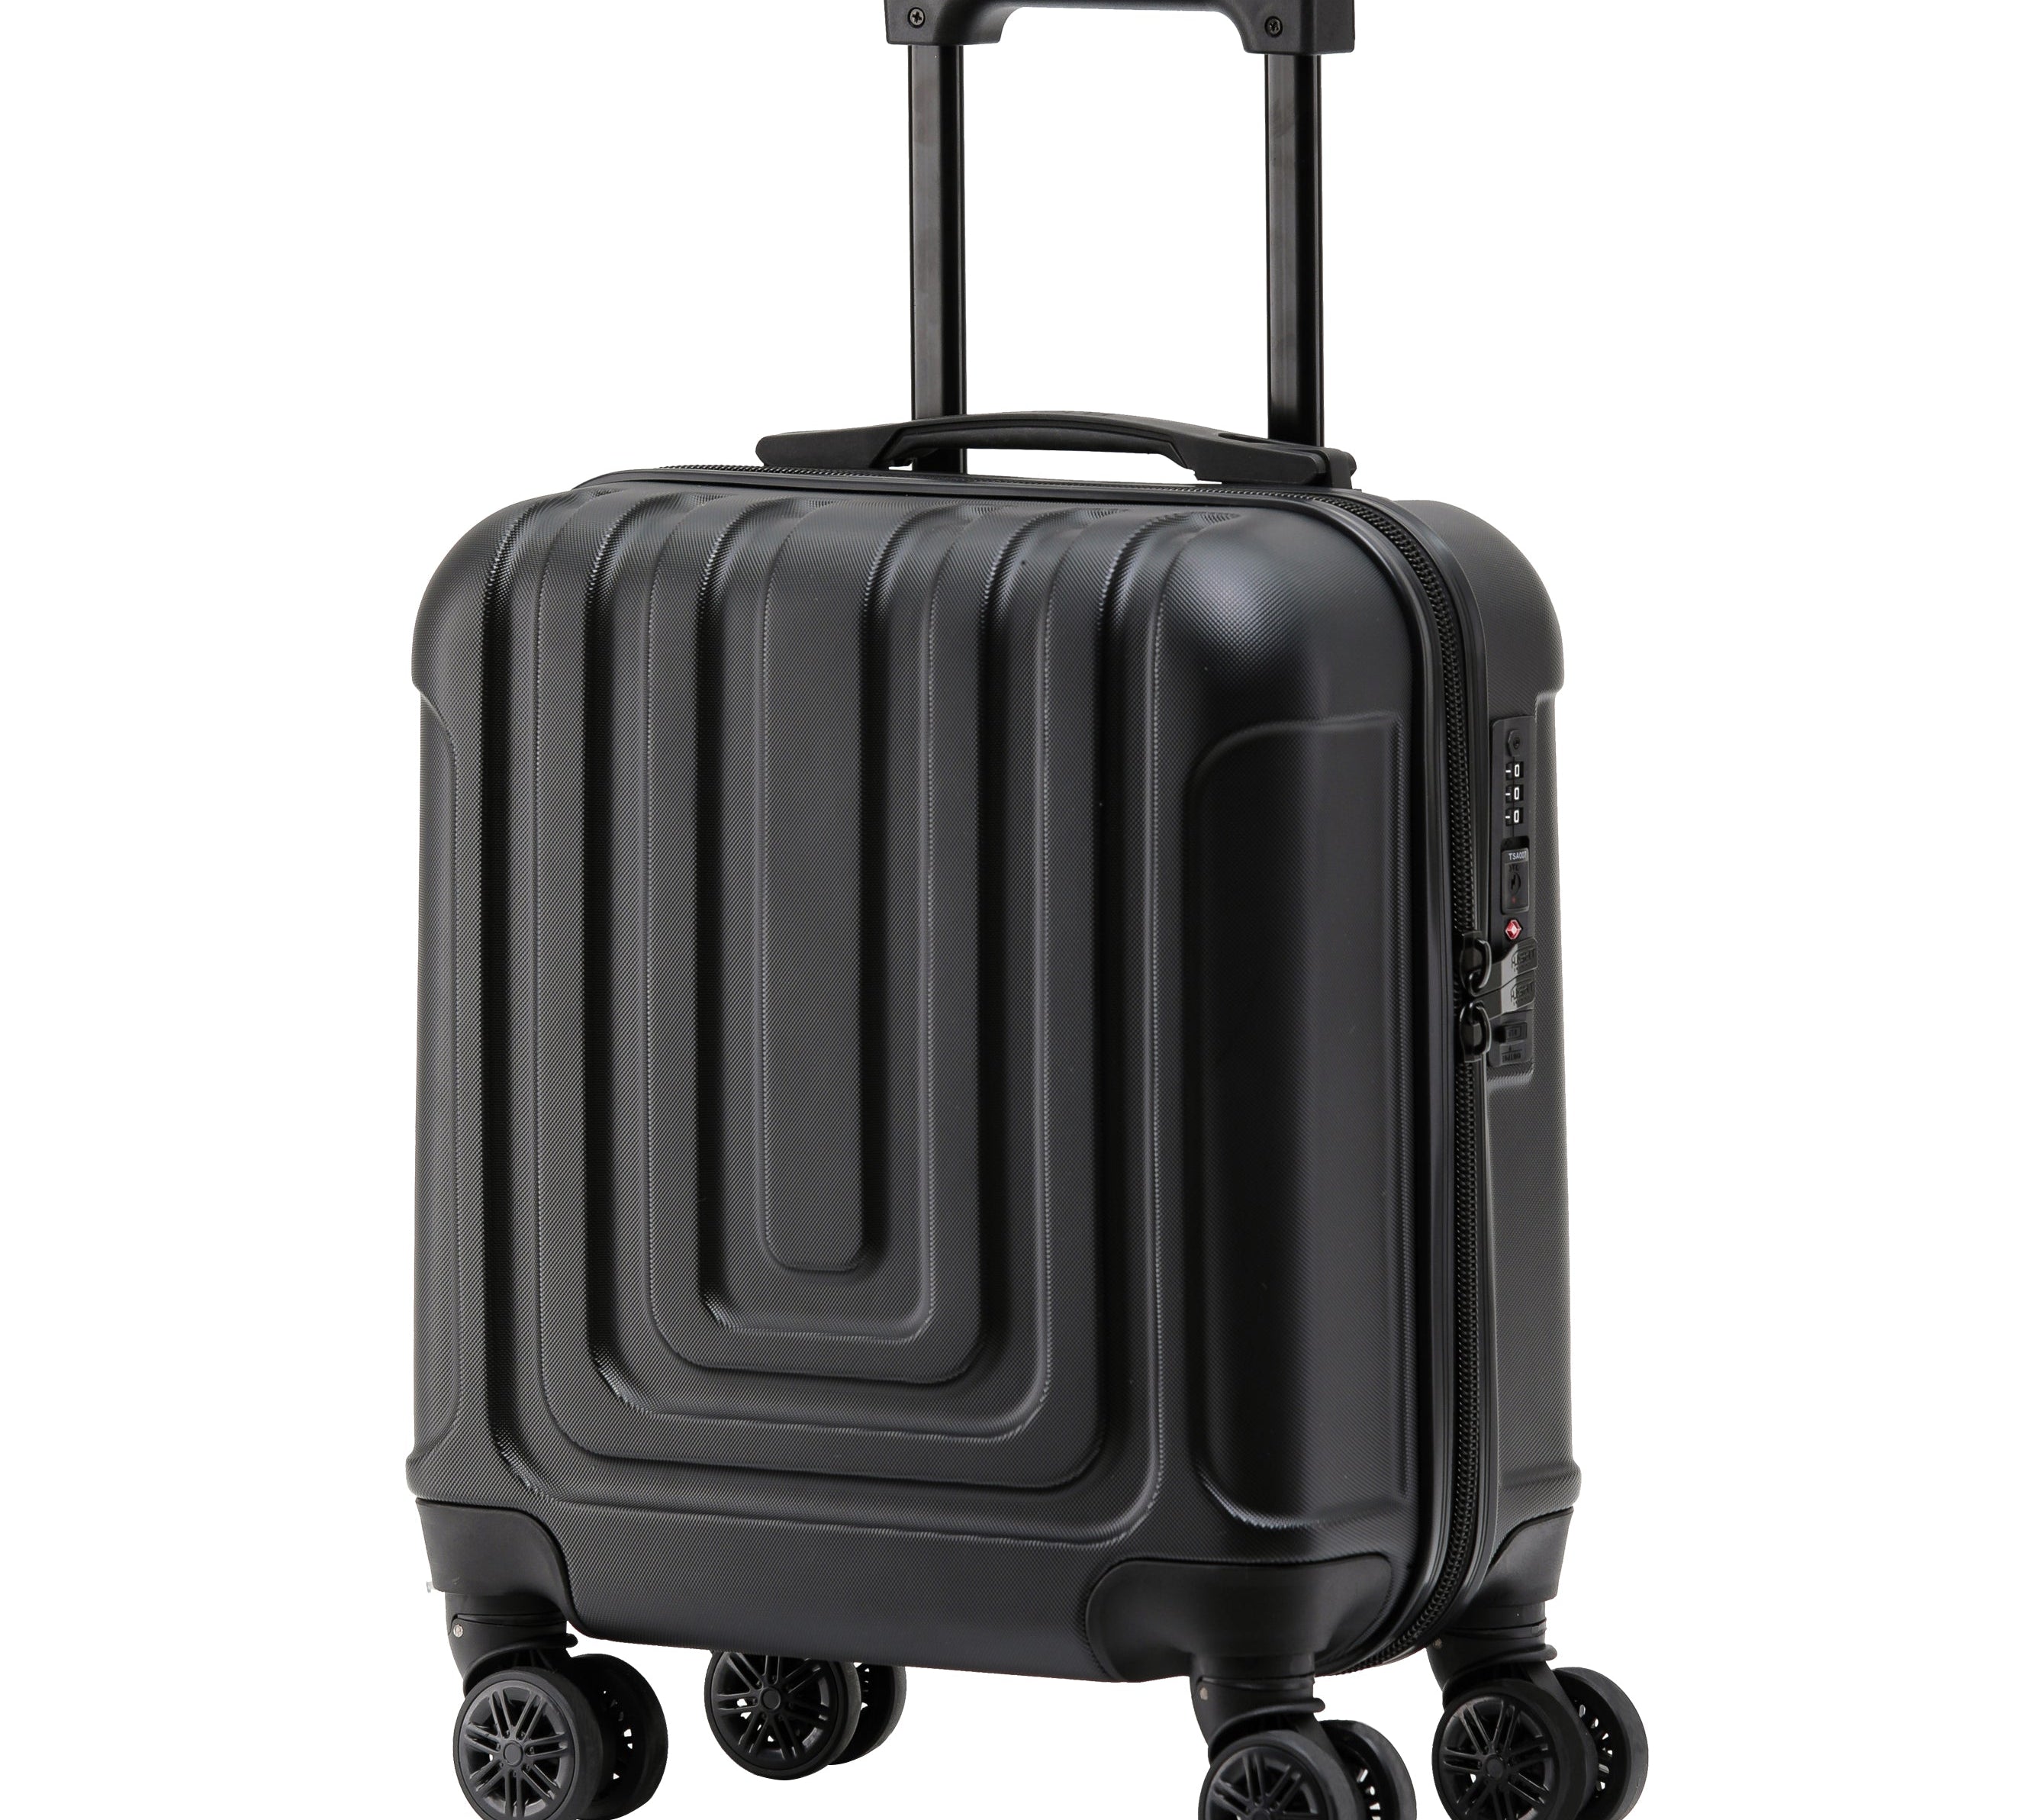 45x36x20cm Premium Hard Shell Lightweight Cabin Suitcase - 8 Spinner Wheels - Built-in TSA Lock & USB Port - Luggage Approved for Over 100 Airlines Including easyJet Underseat